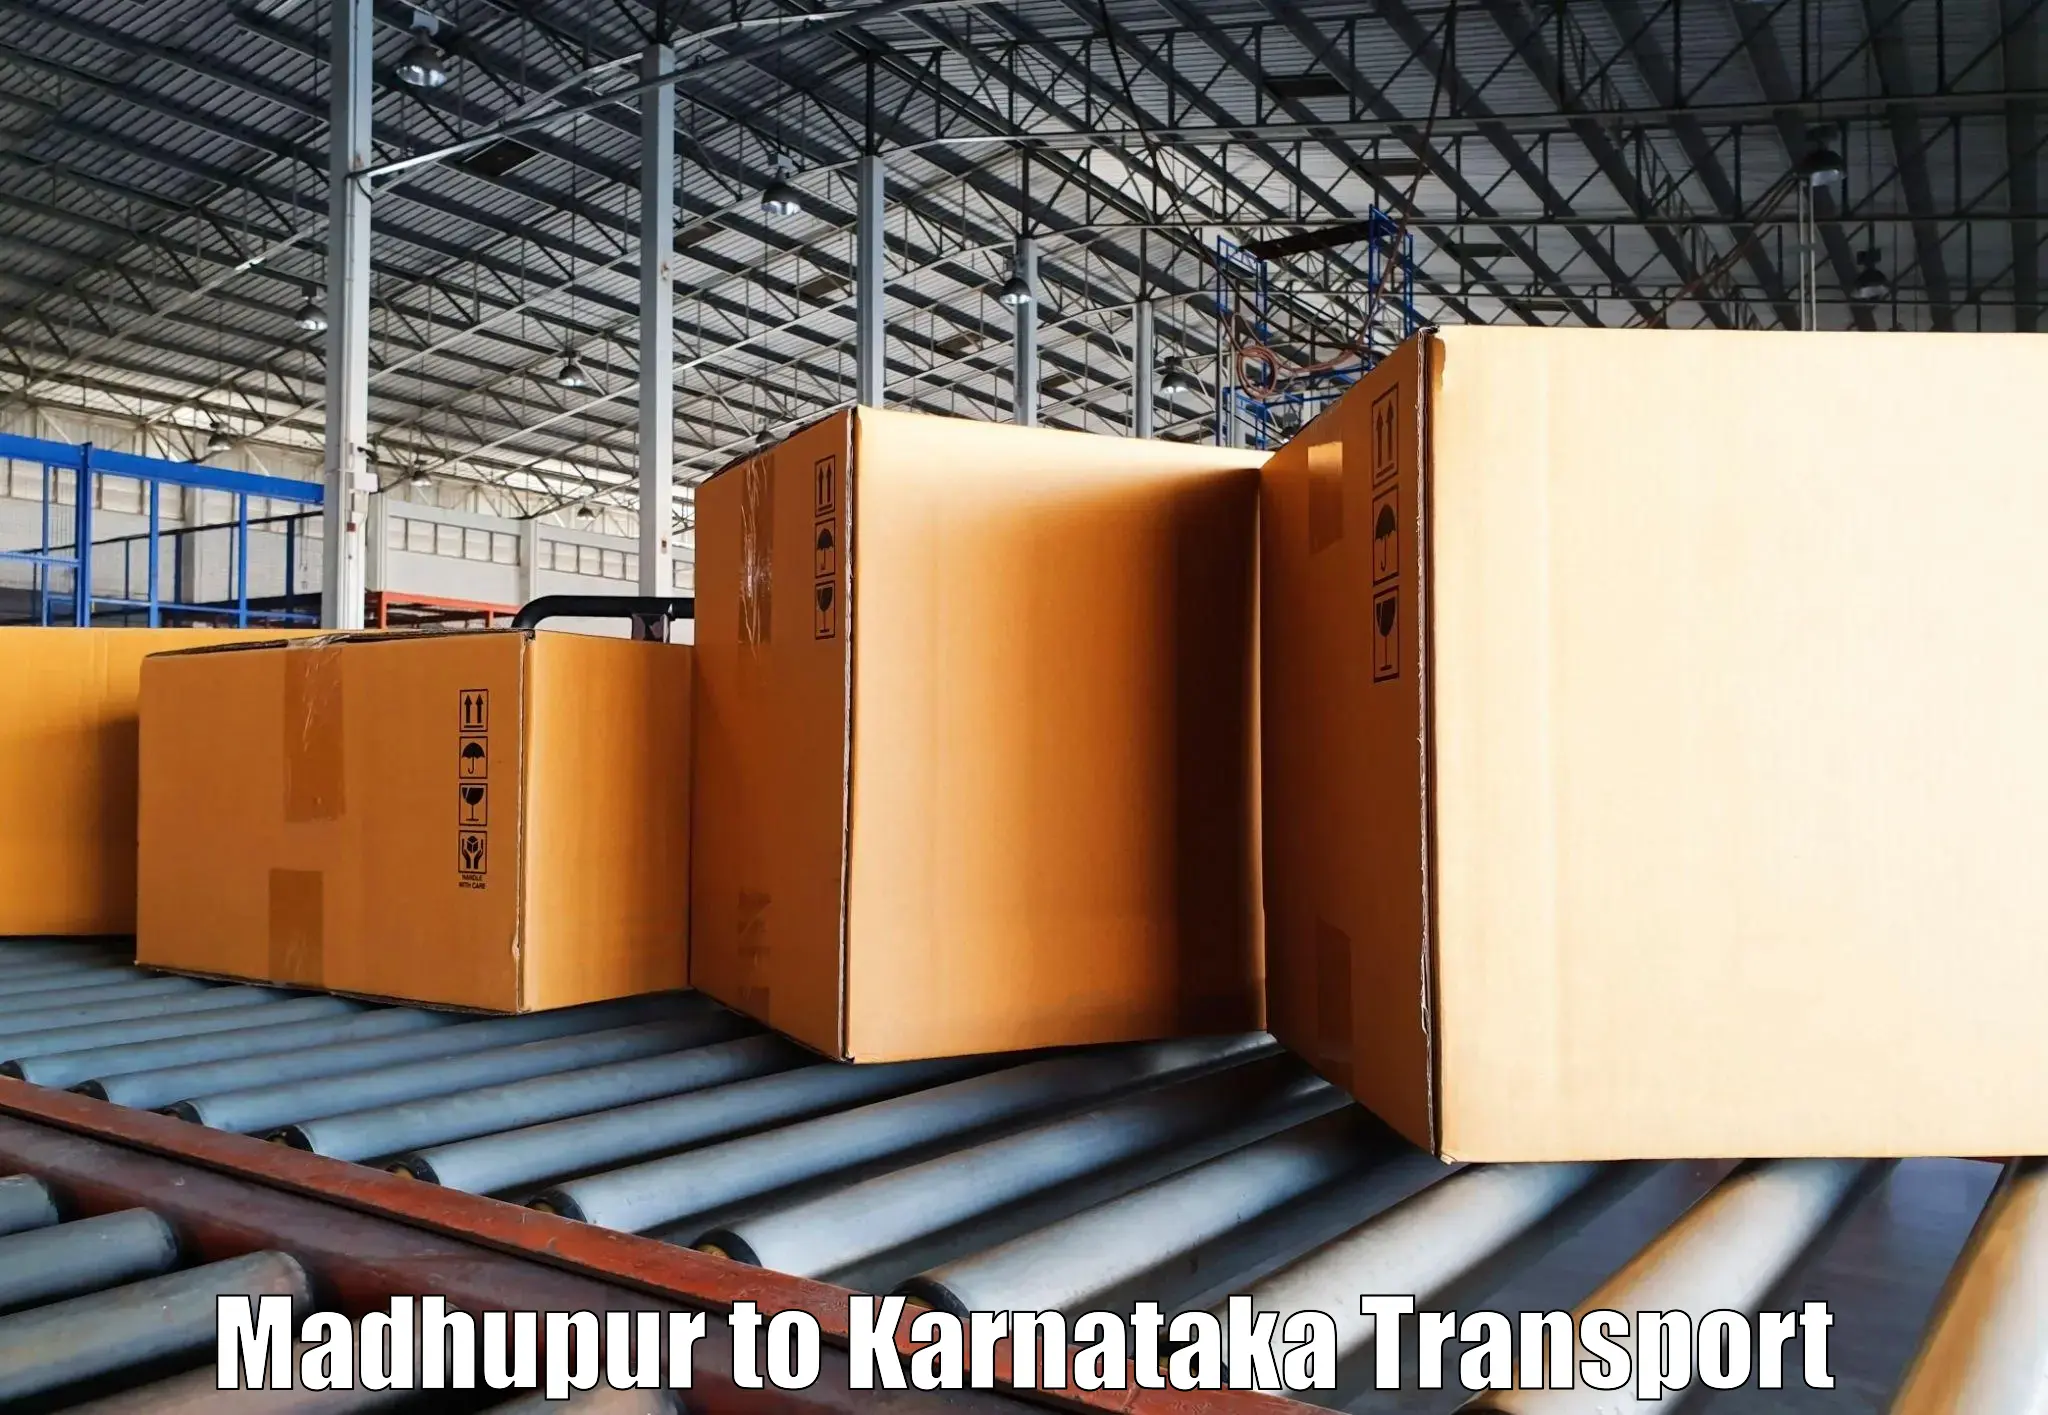 Express transport services Madhupur to Mangalore Port